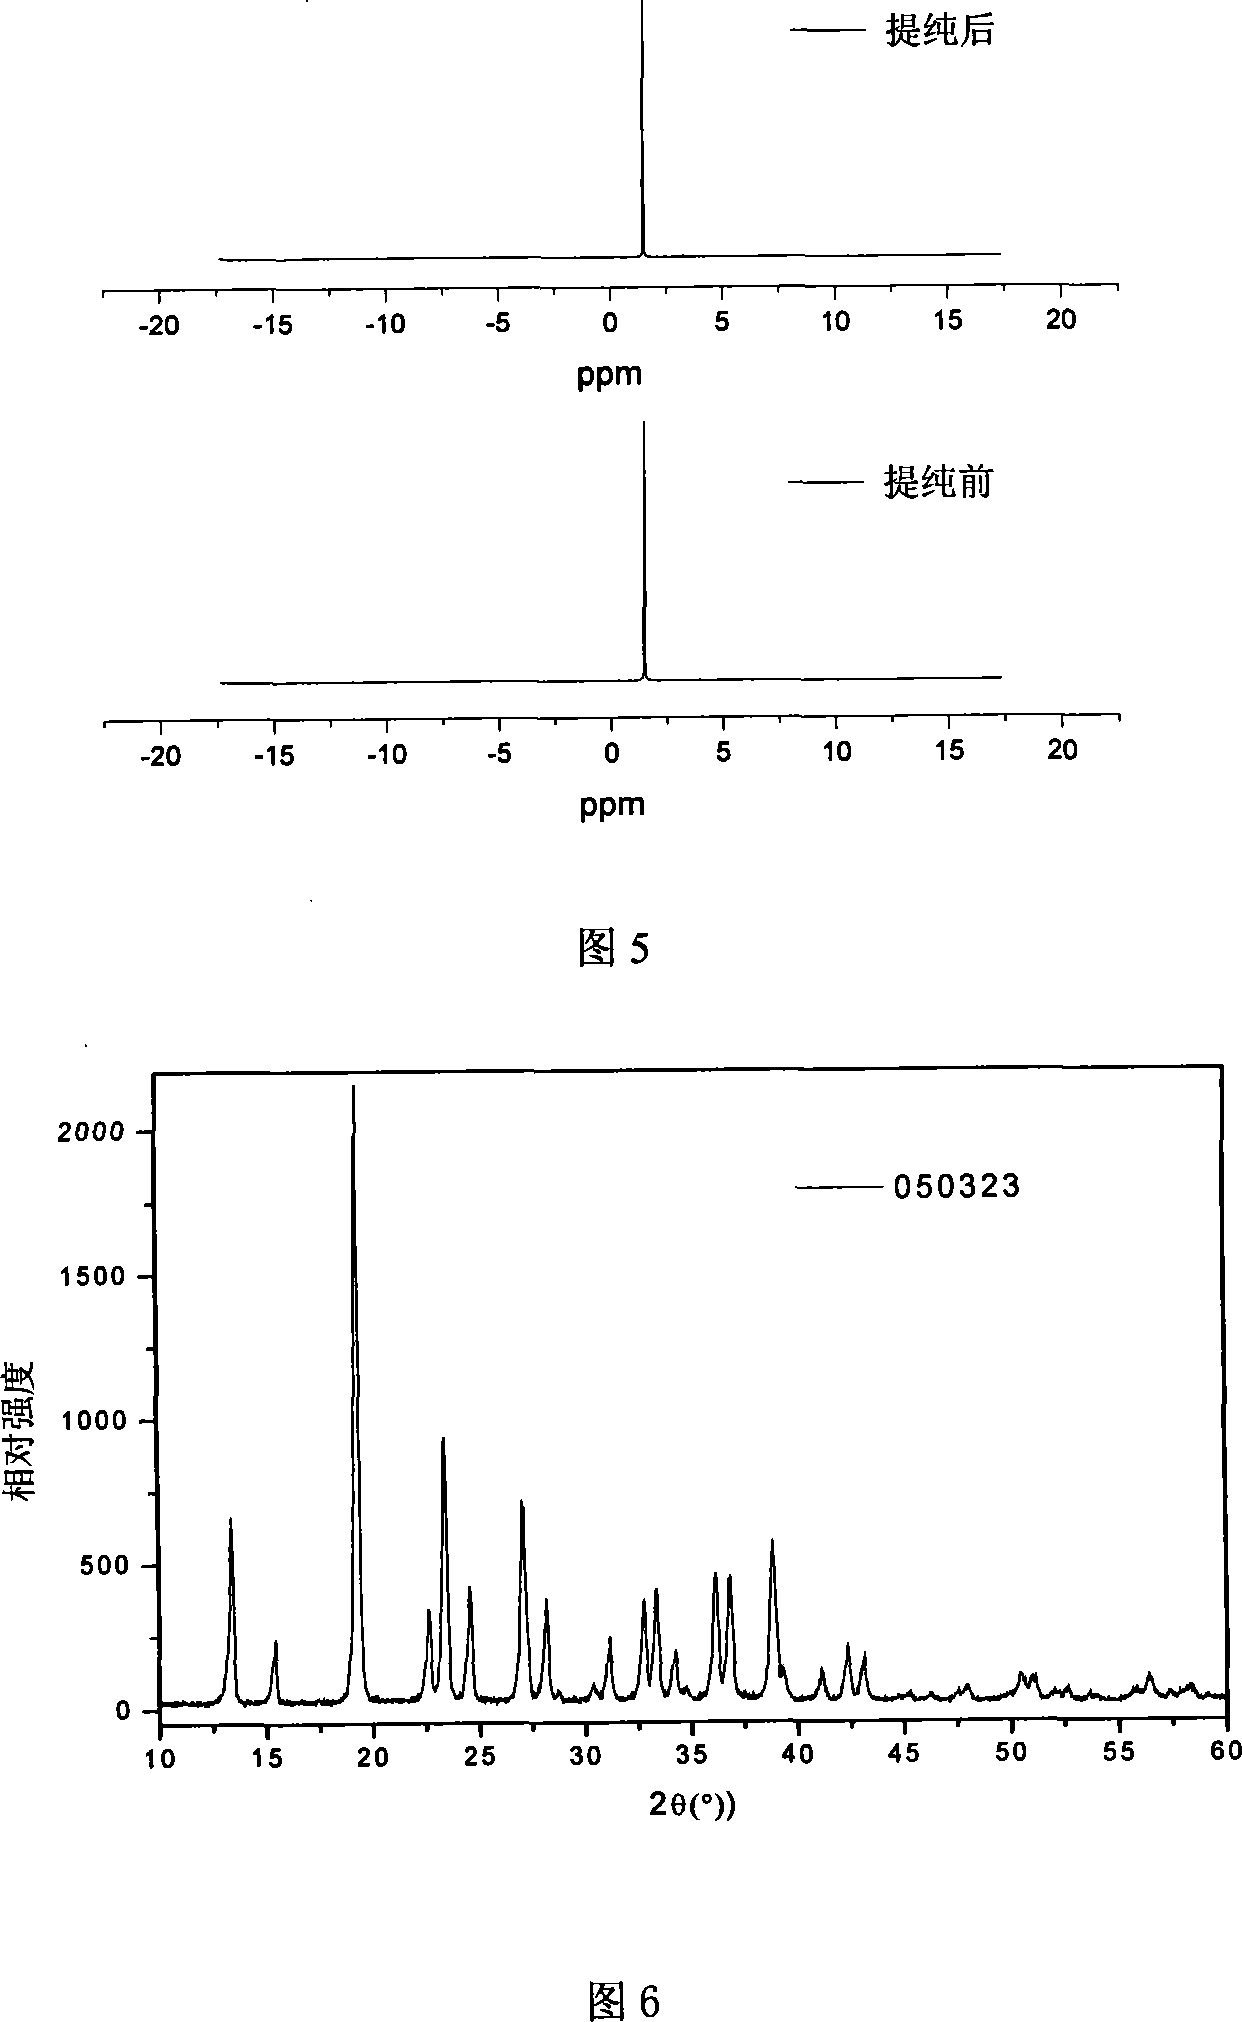 Microwave process of synthesizing lithium dioxalate borate